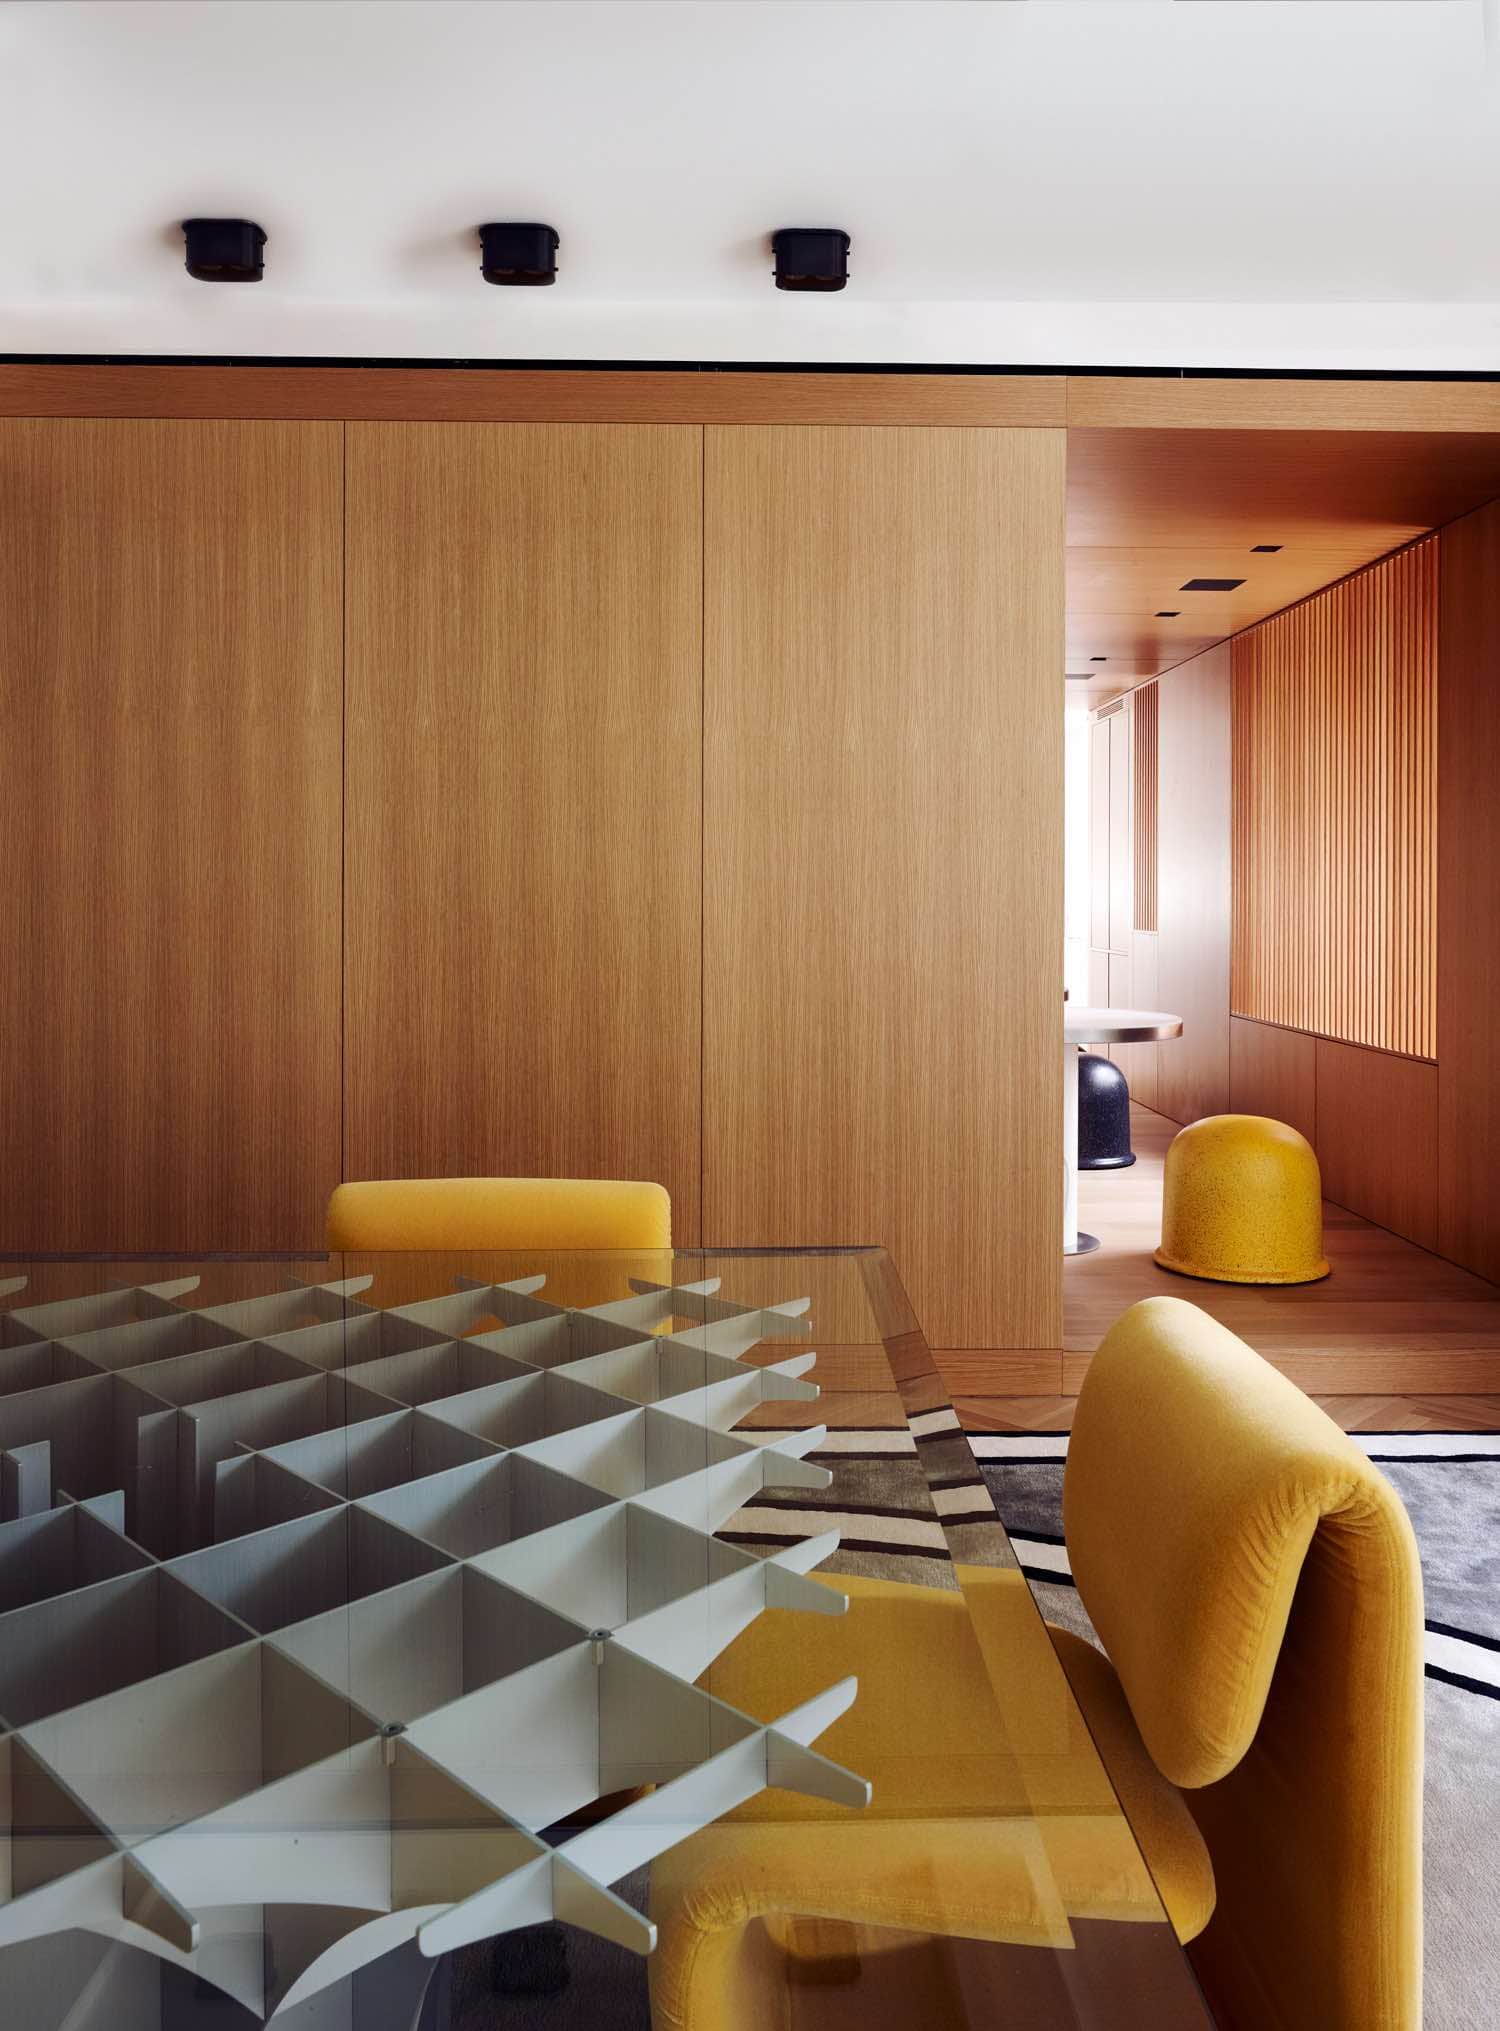 This image shows a dining room designed by Carol Egan featuring the "Cathedrale" table by Pierre Paulin, a sculptural aluminum and glass dining table with the "Programme 1500" chairs by Etienne-Henri Martin from upholstered in yellow wood mohair fabric.  In the background is a paneled oak wall with Flush mount, bronze ceiling lights on the ceiling above.